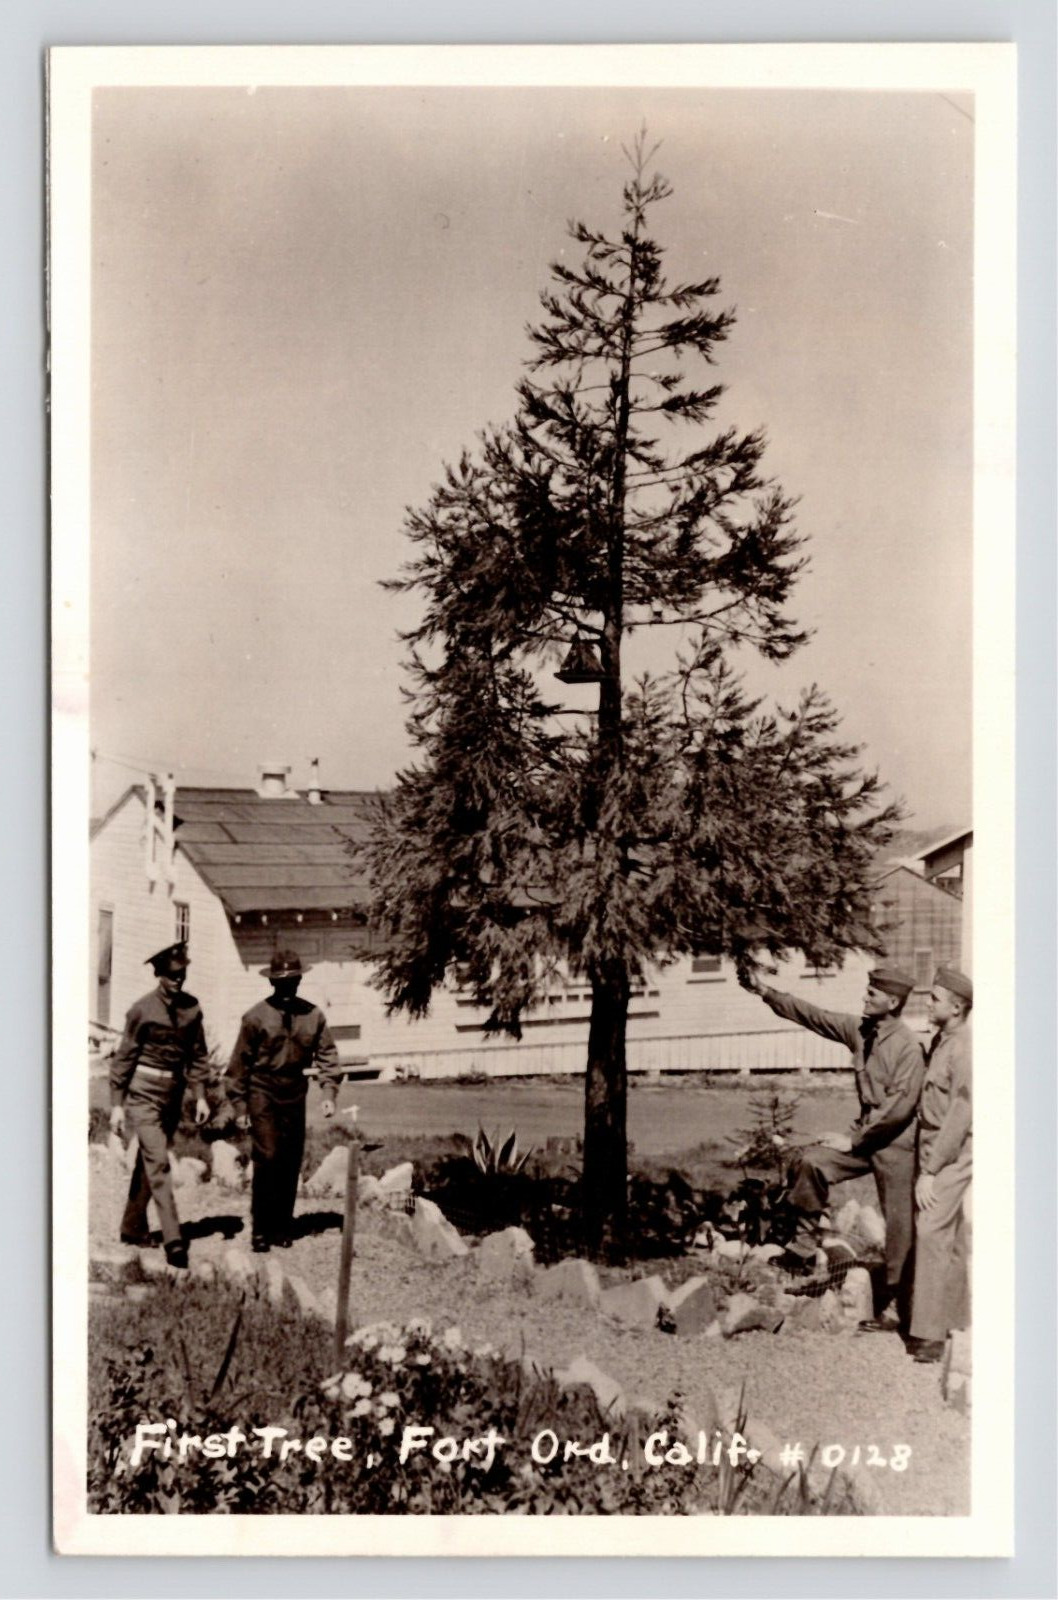 RPPC First Tree Fort Ord California Military Soldiers VTG Unused Photo Postcard